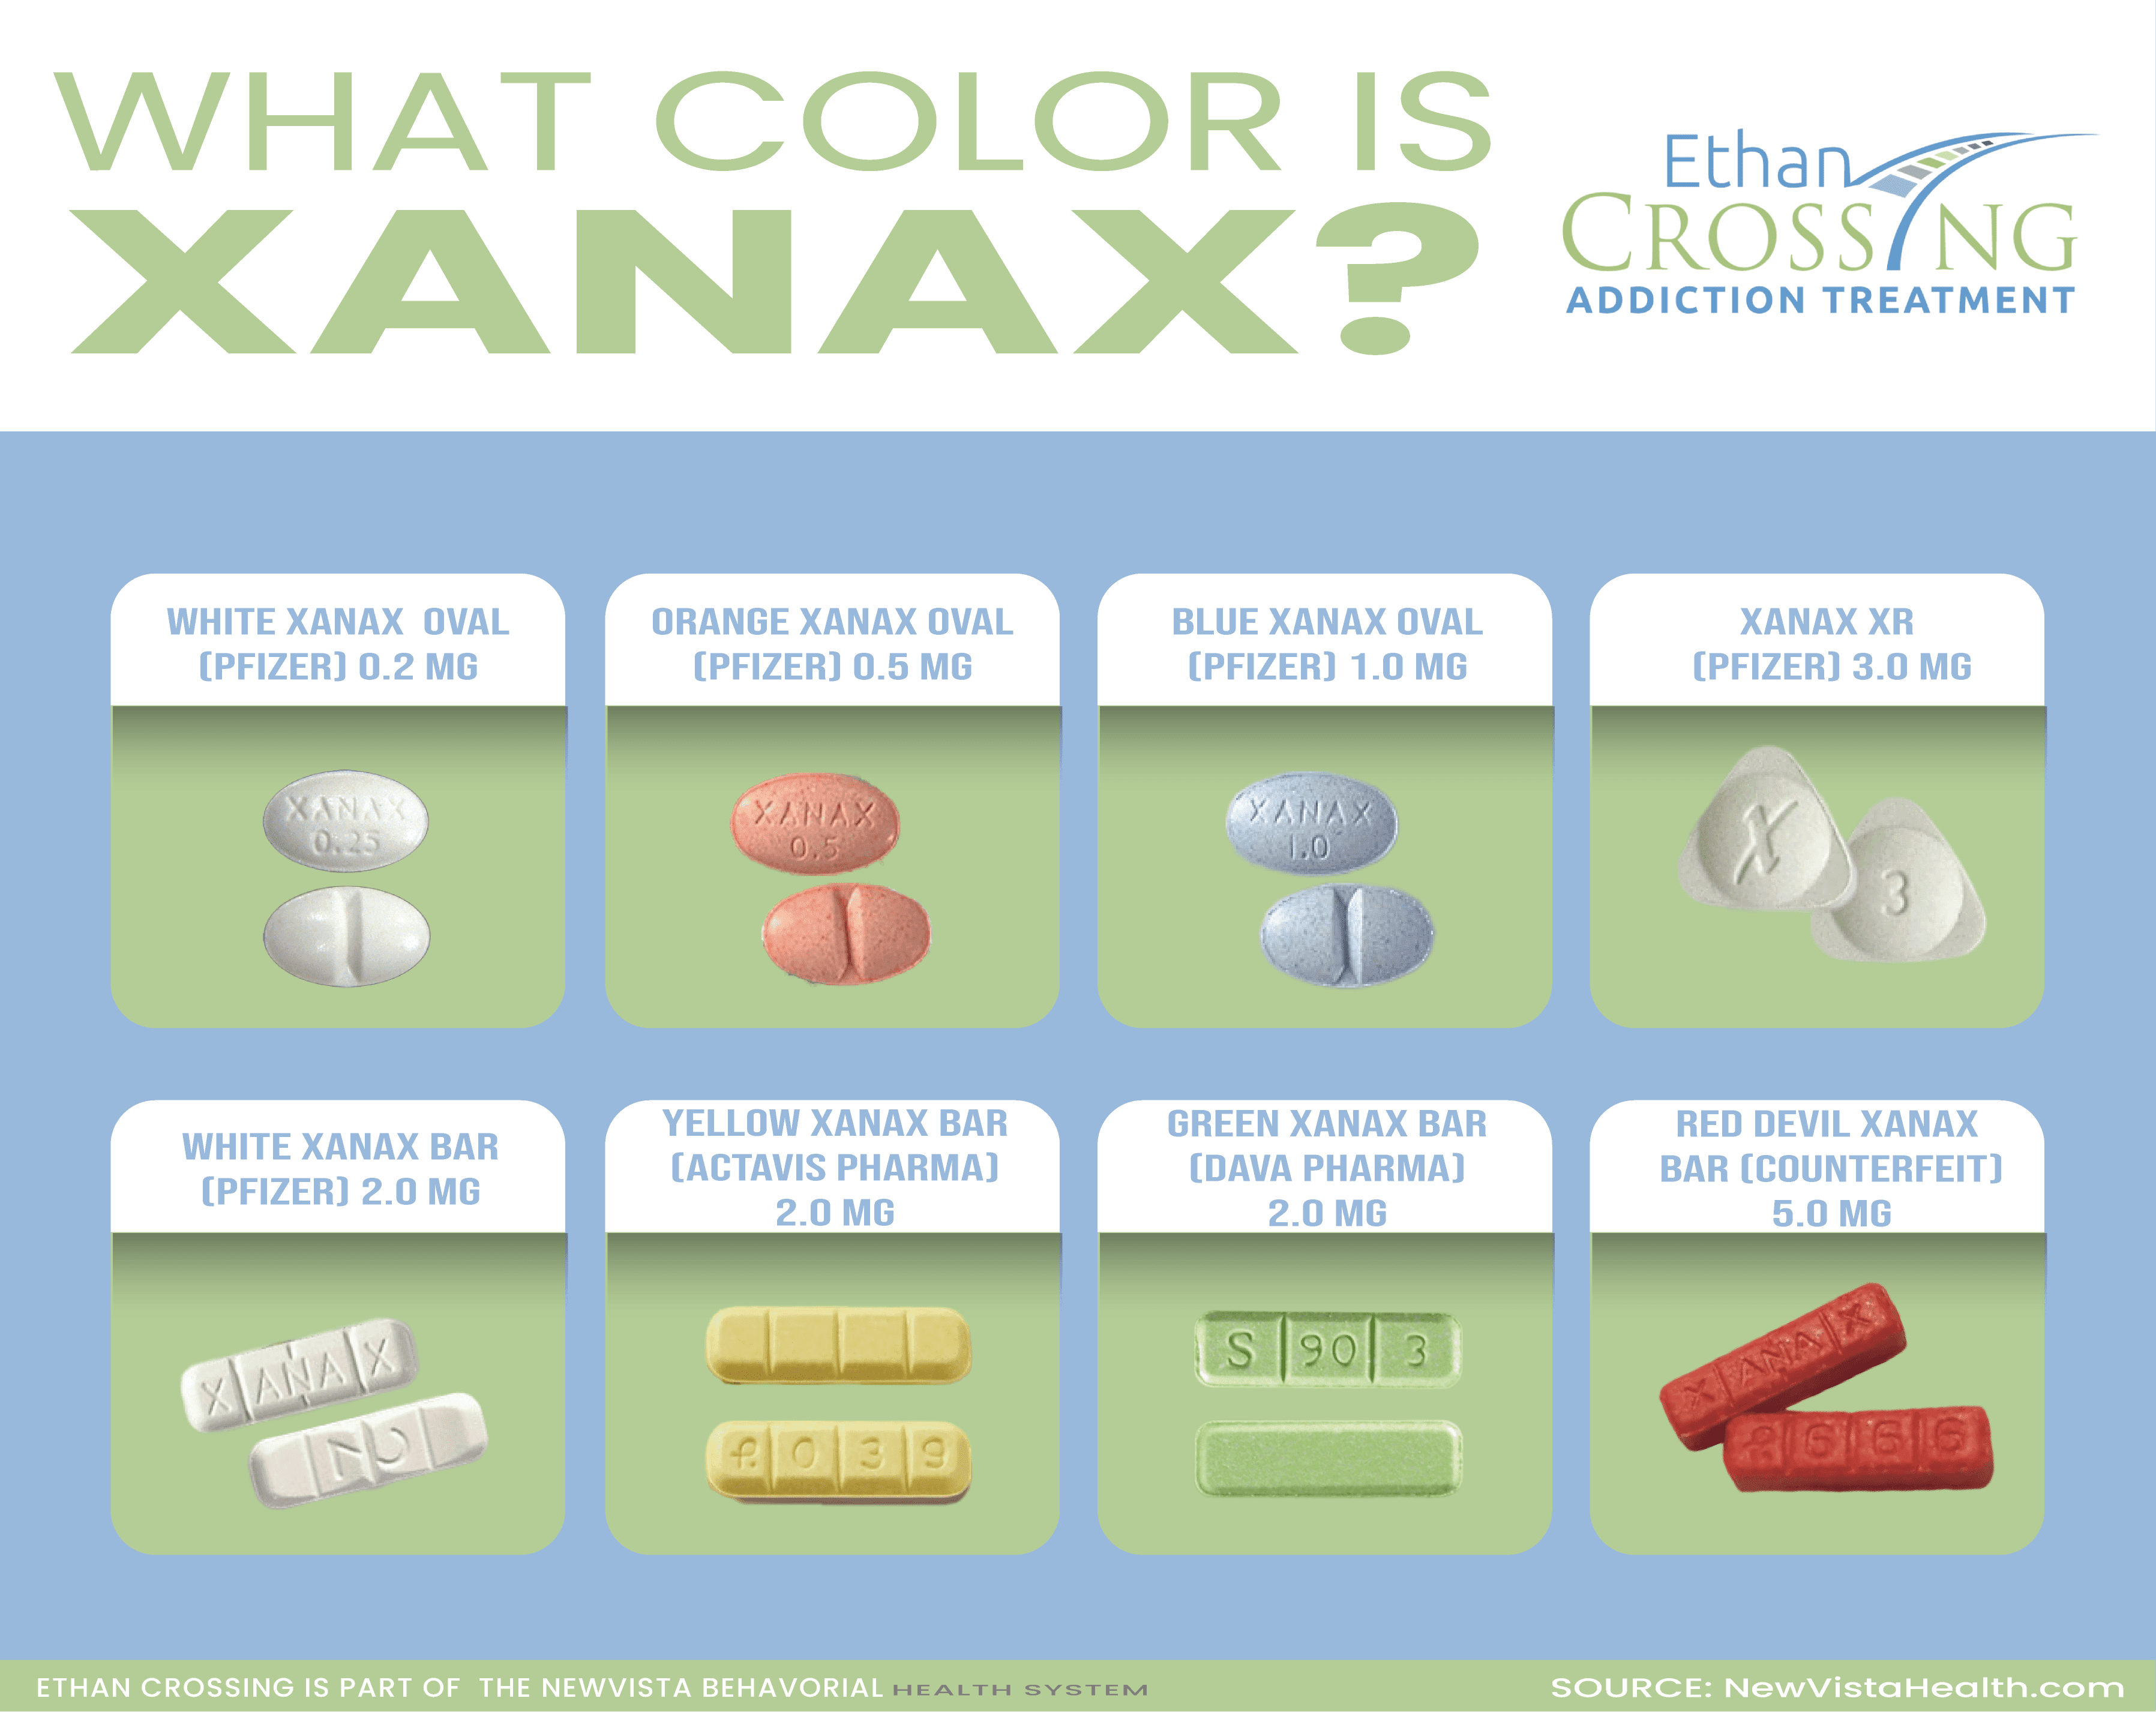 What Color Is Xanax & What Does it Look Like